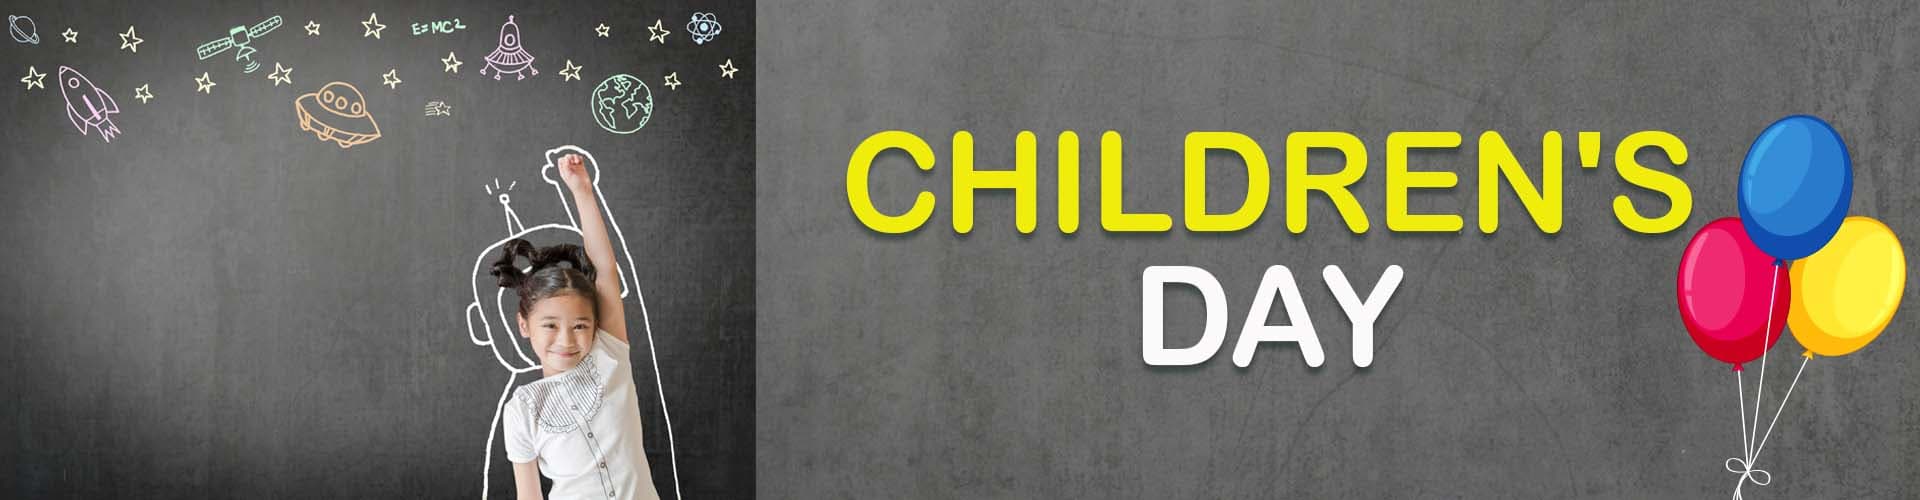 Children’s Day: History, Wish, Slogans, and Thoughts